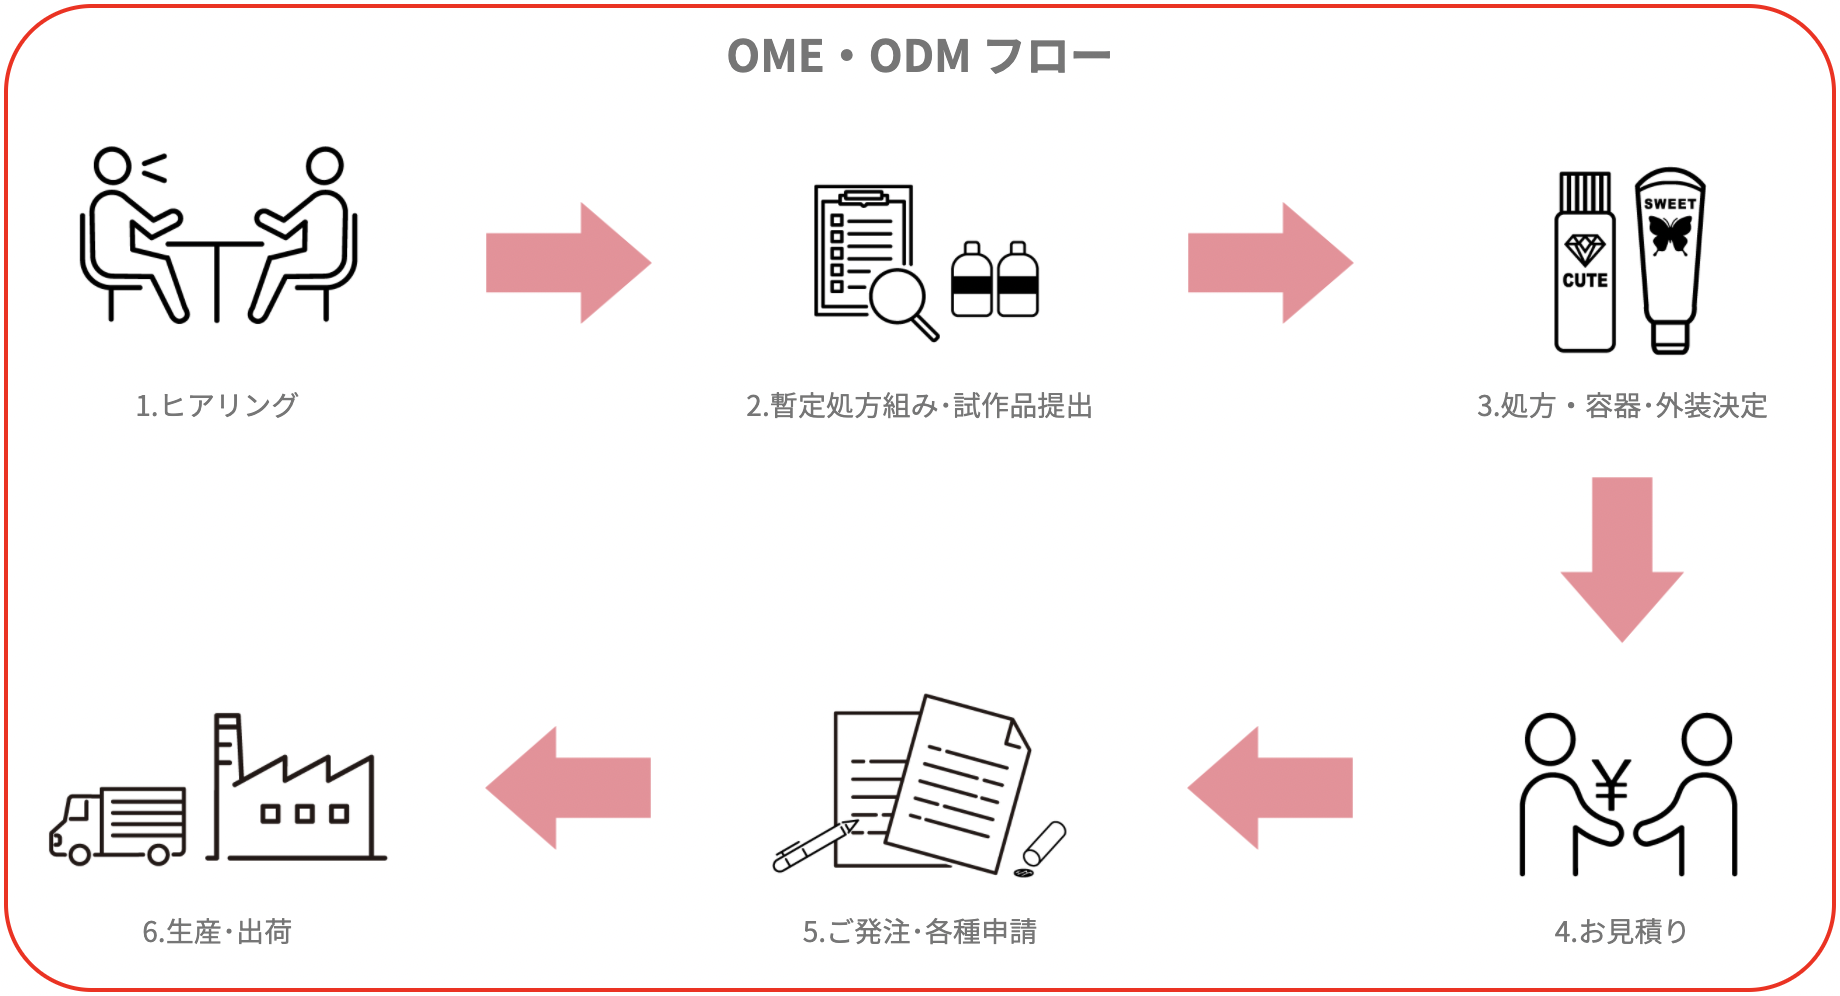 OME・ODM フロー